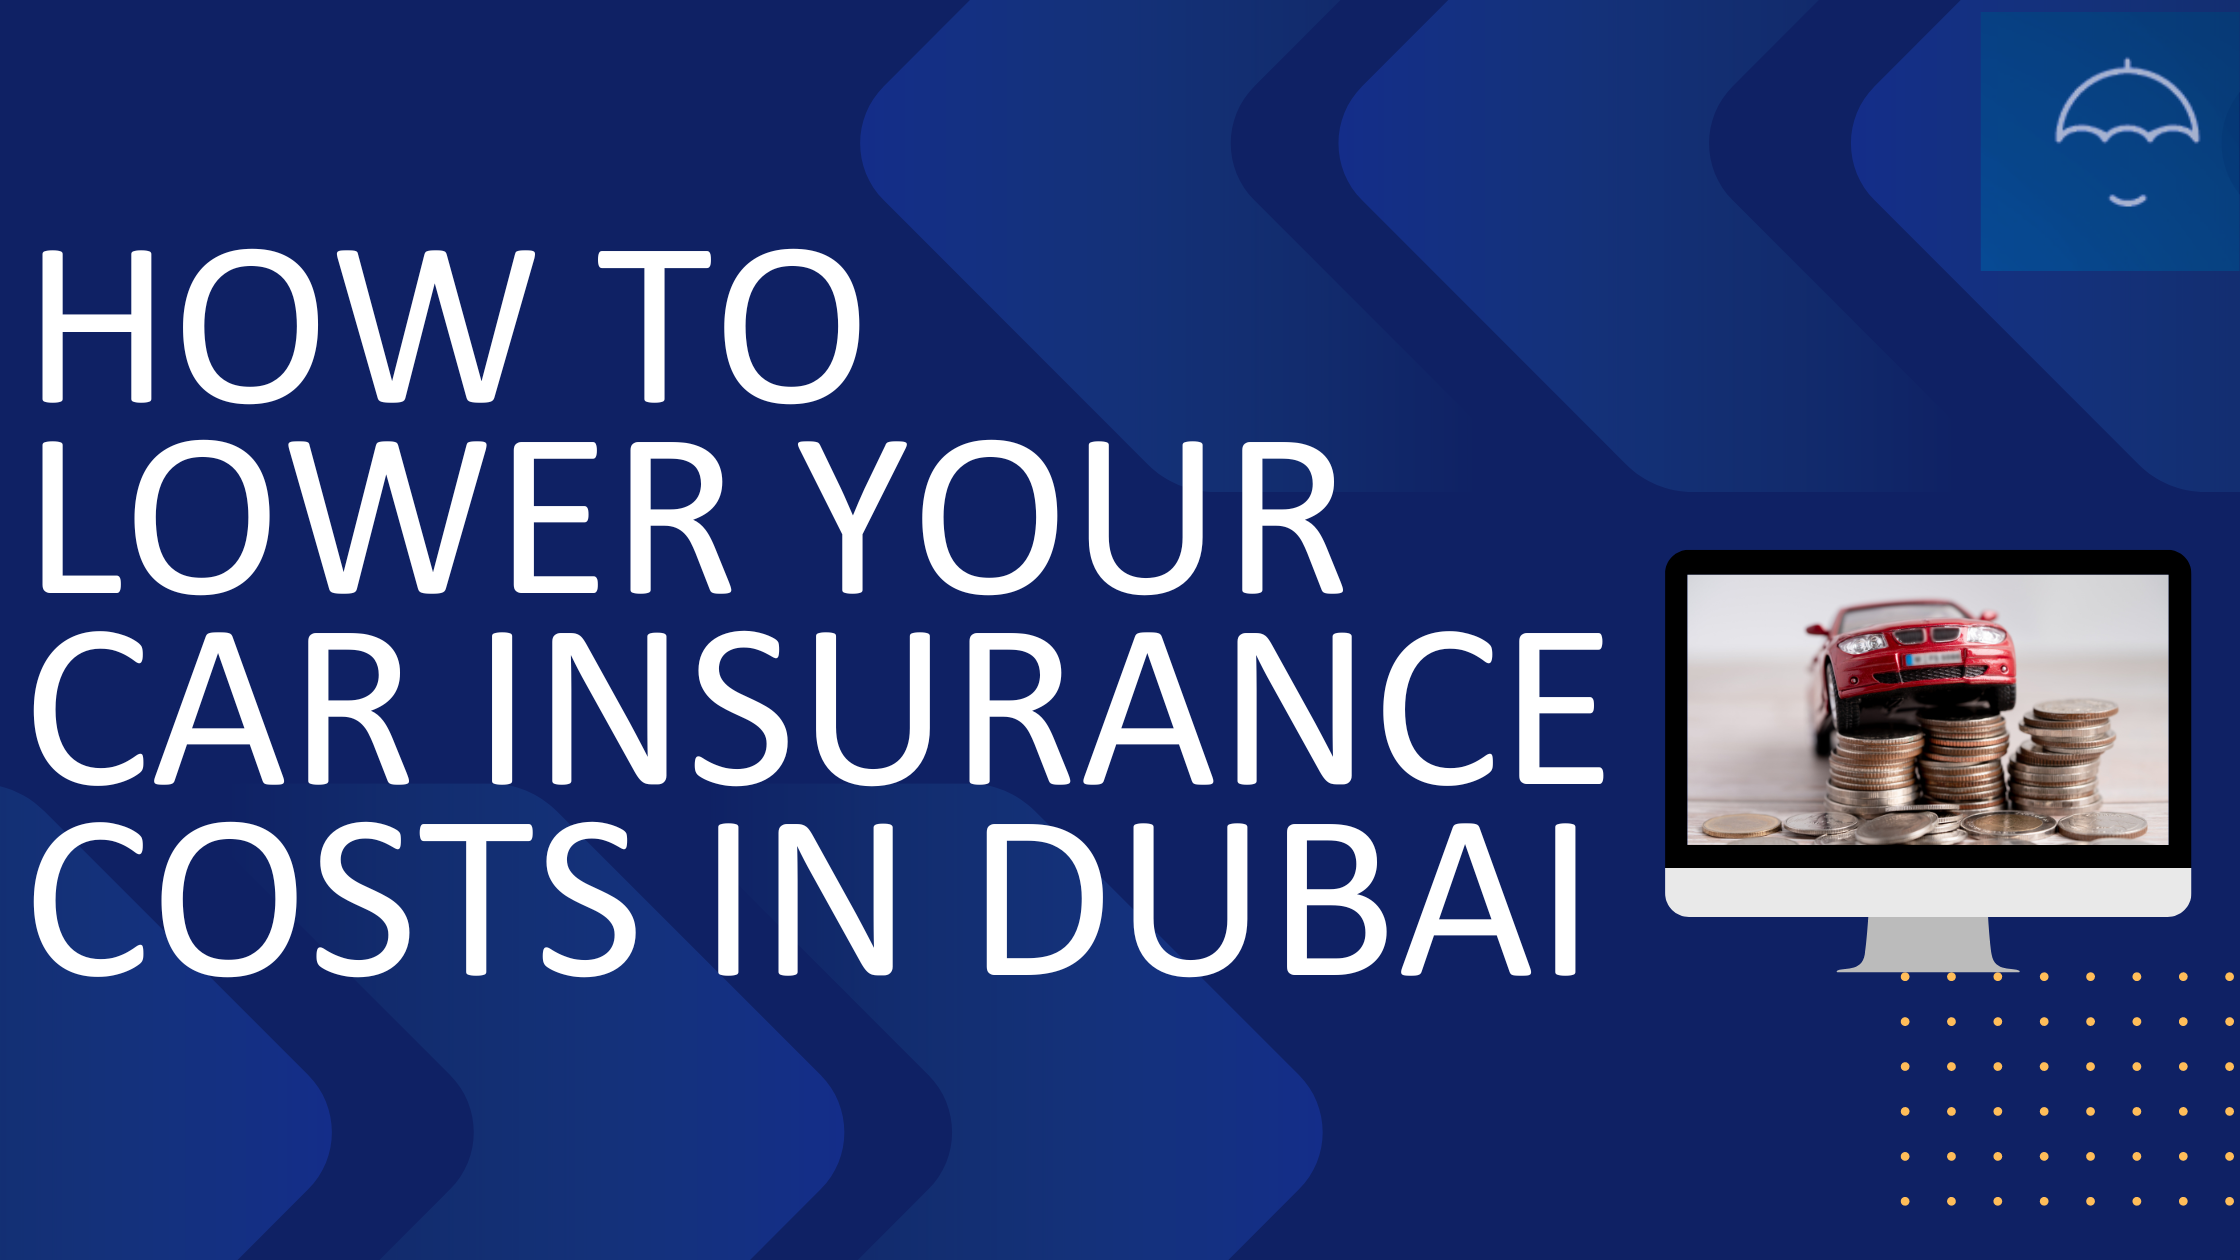 How to lower your car insurance cost in Dubai